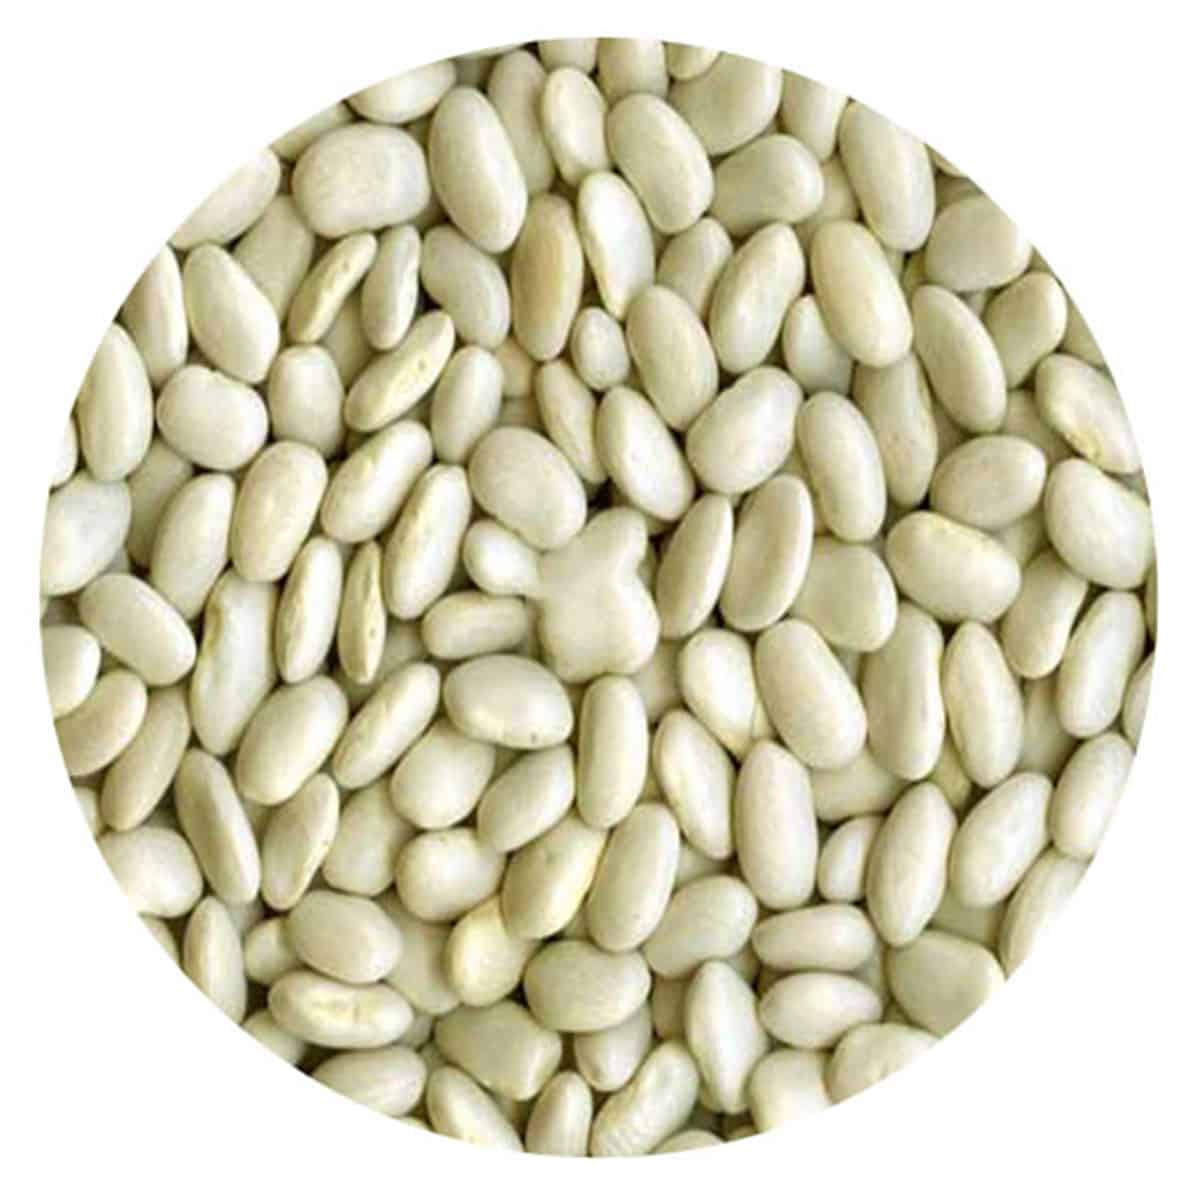 Buy IAG Foods Dried Great Northern Beans - 1 kg